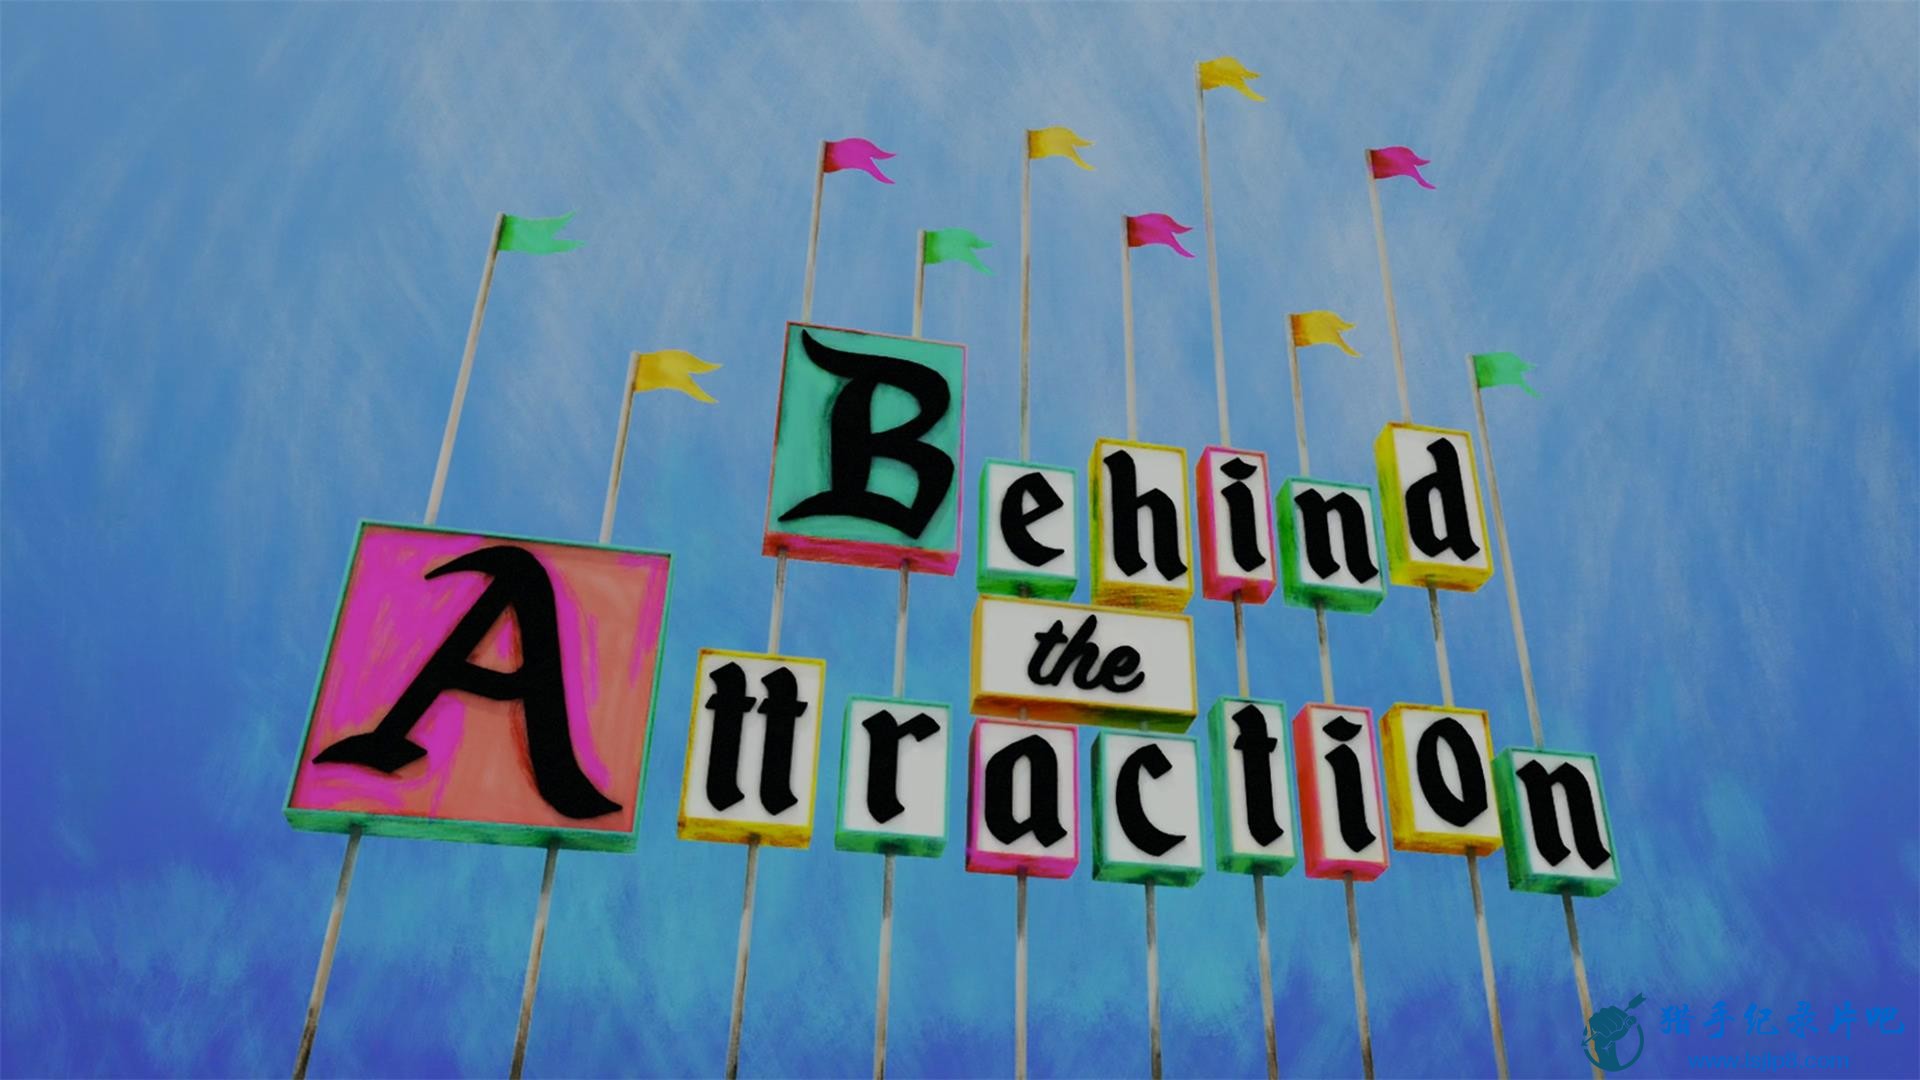 Behind.the.Attraction.S01E01.HDR.2160p.WEB.h265-KOGi.2.jpg